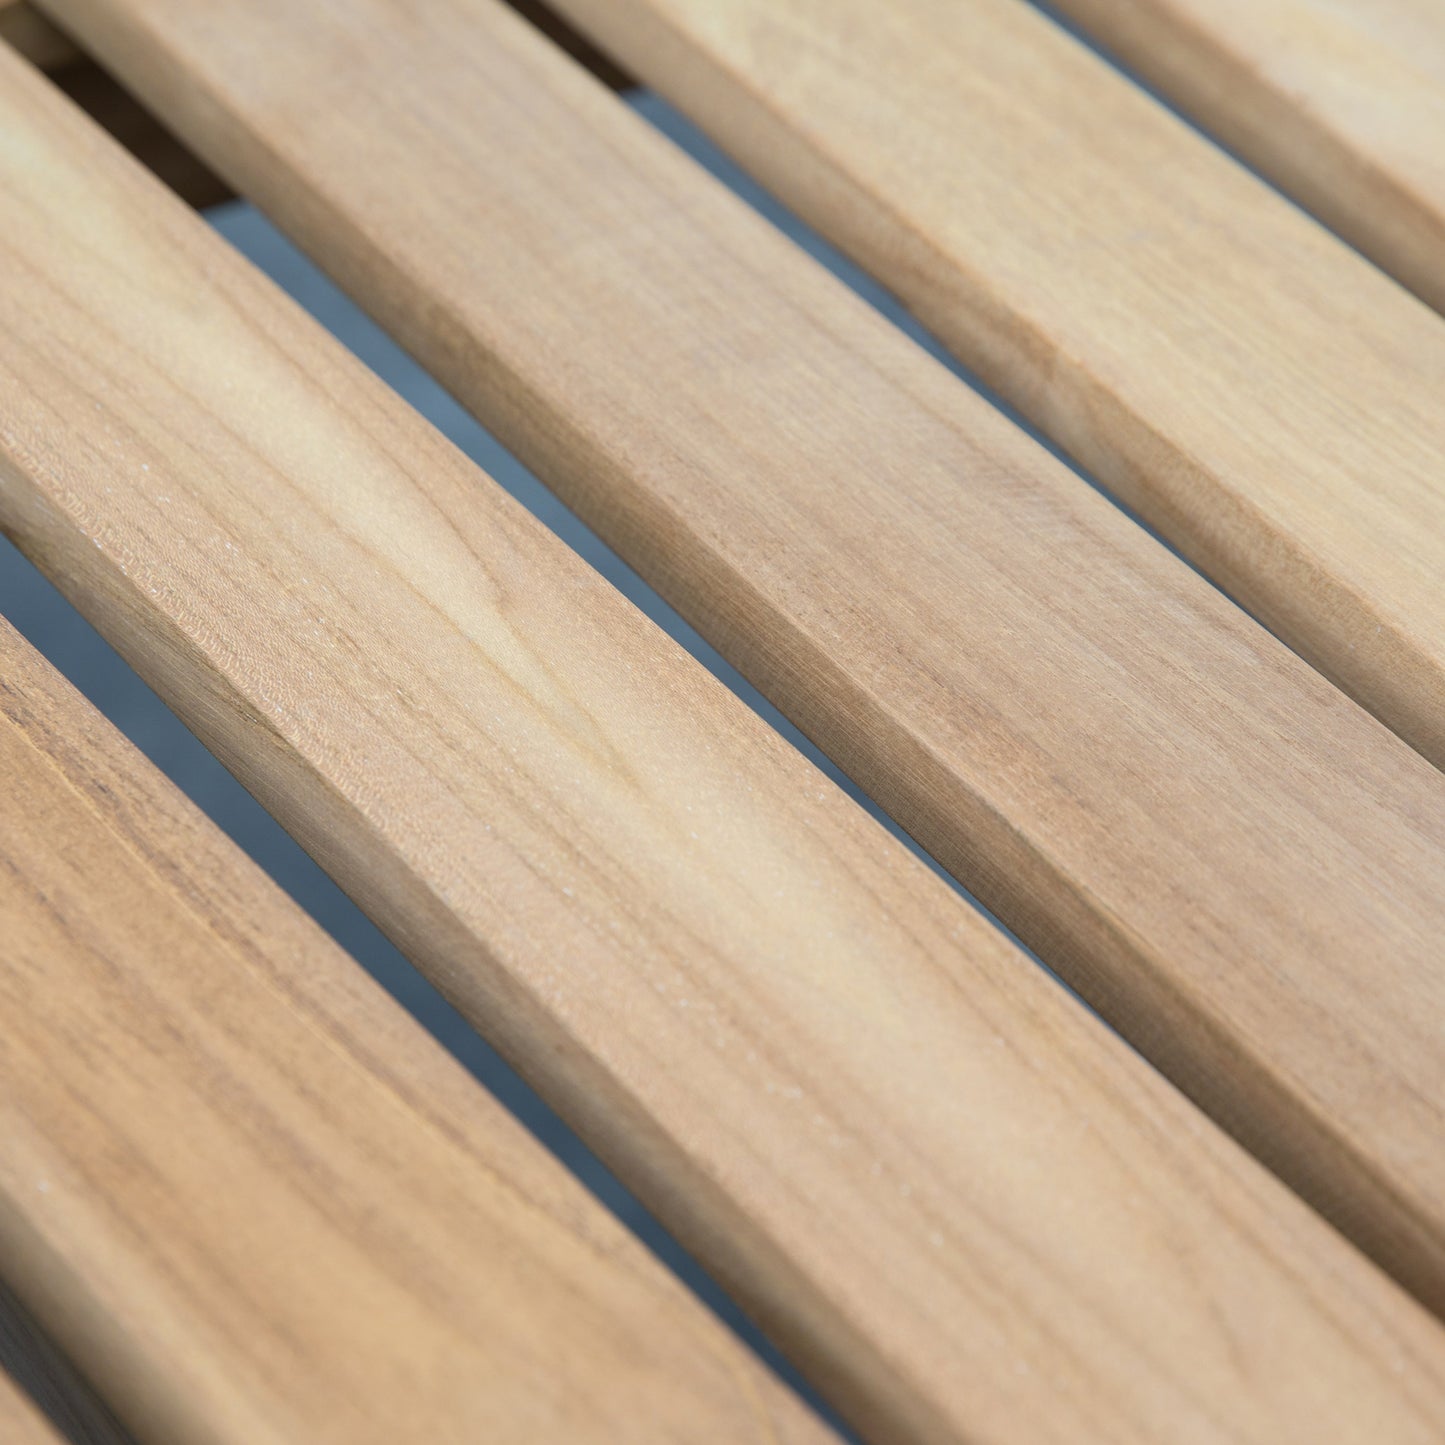 A close up view of the Ottery Bench, a home furniture piece by Kikiathome.co.uk.